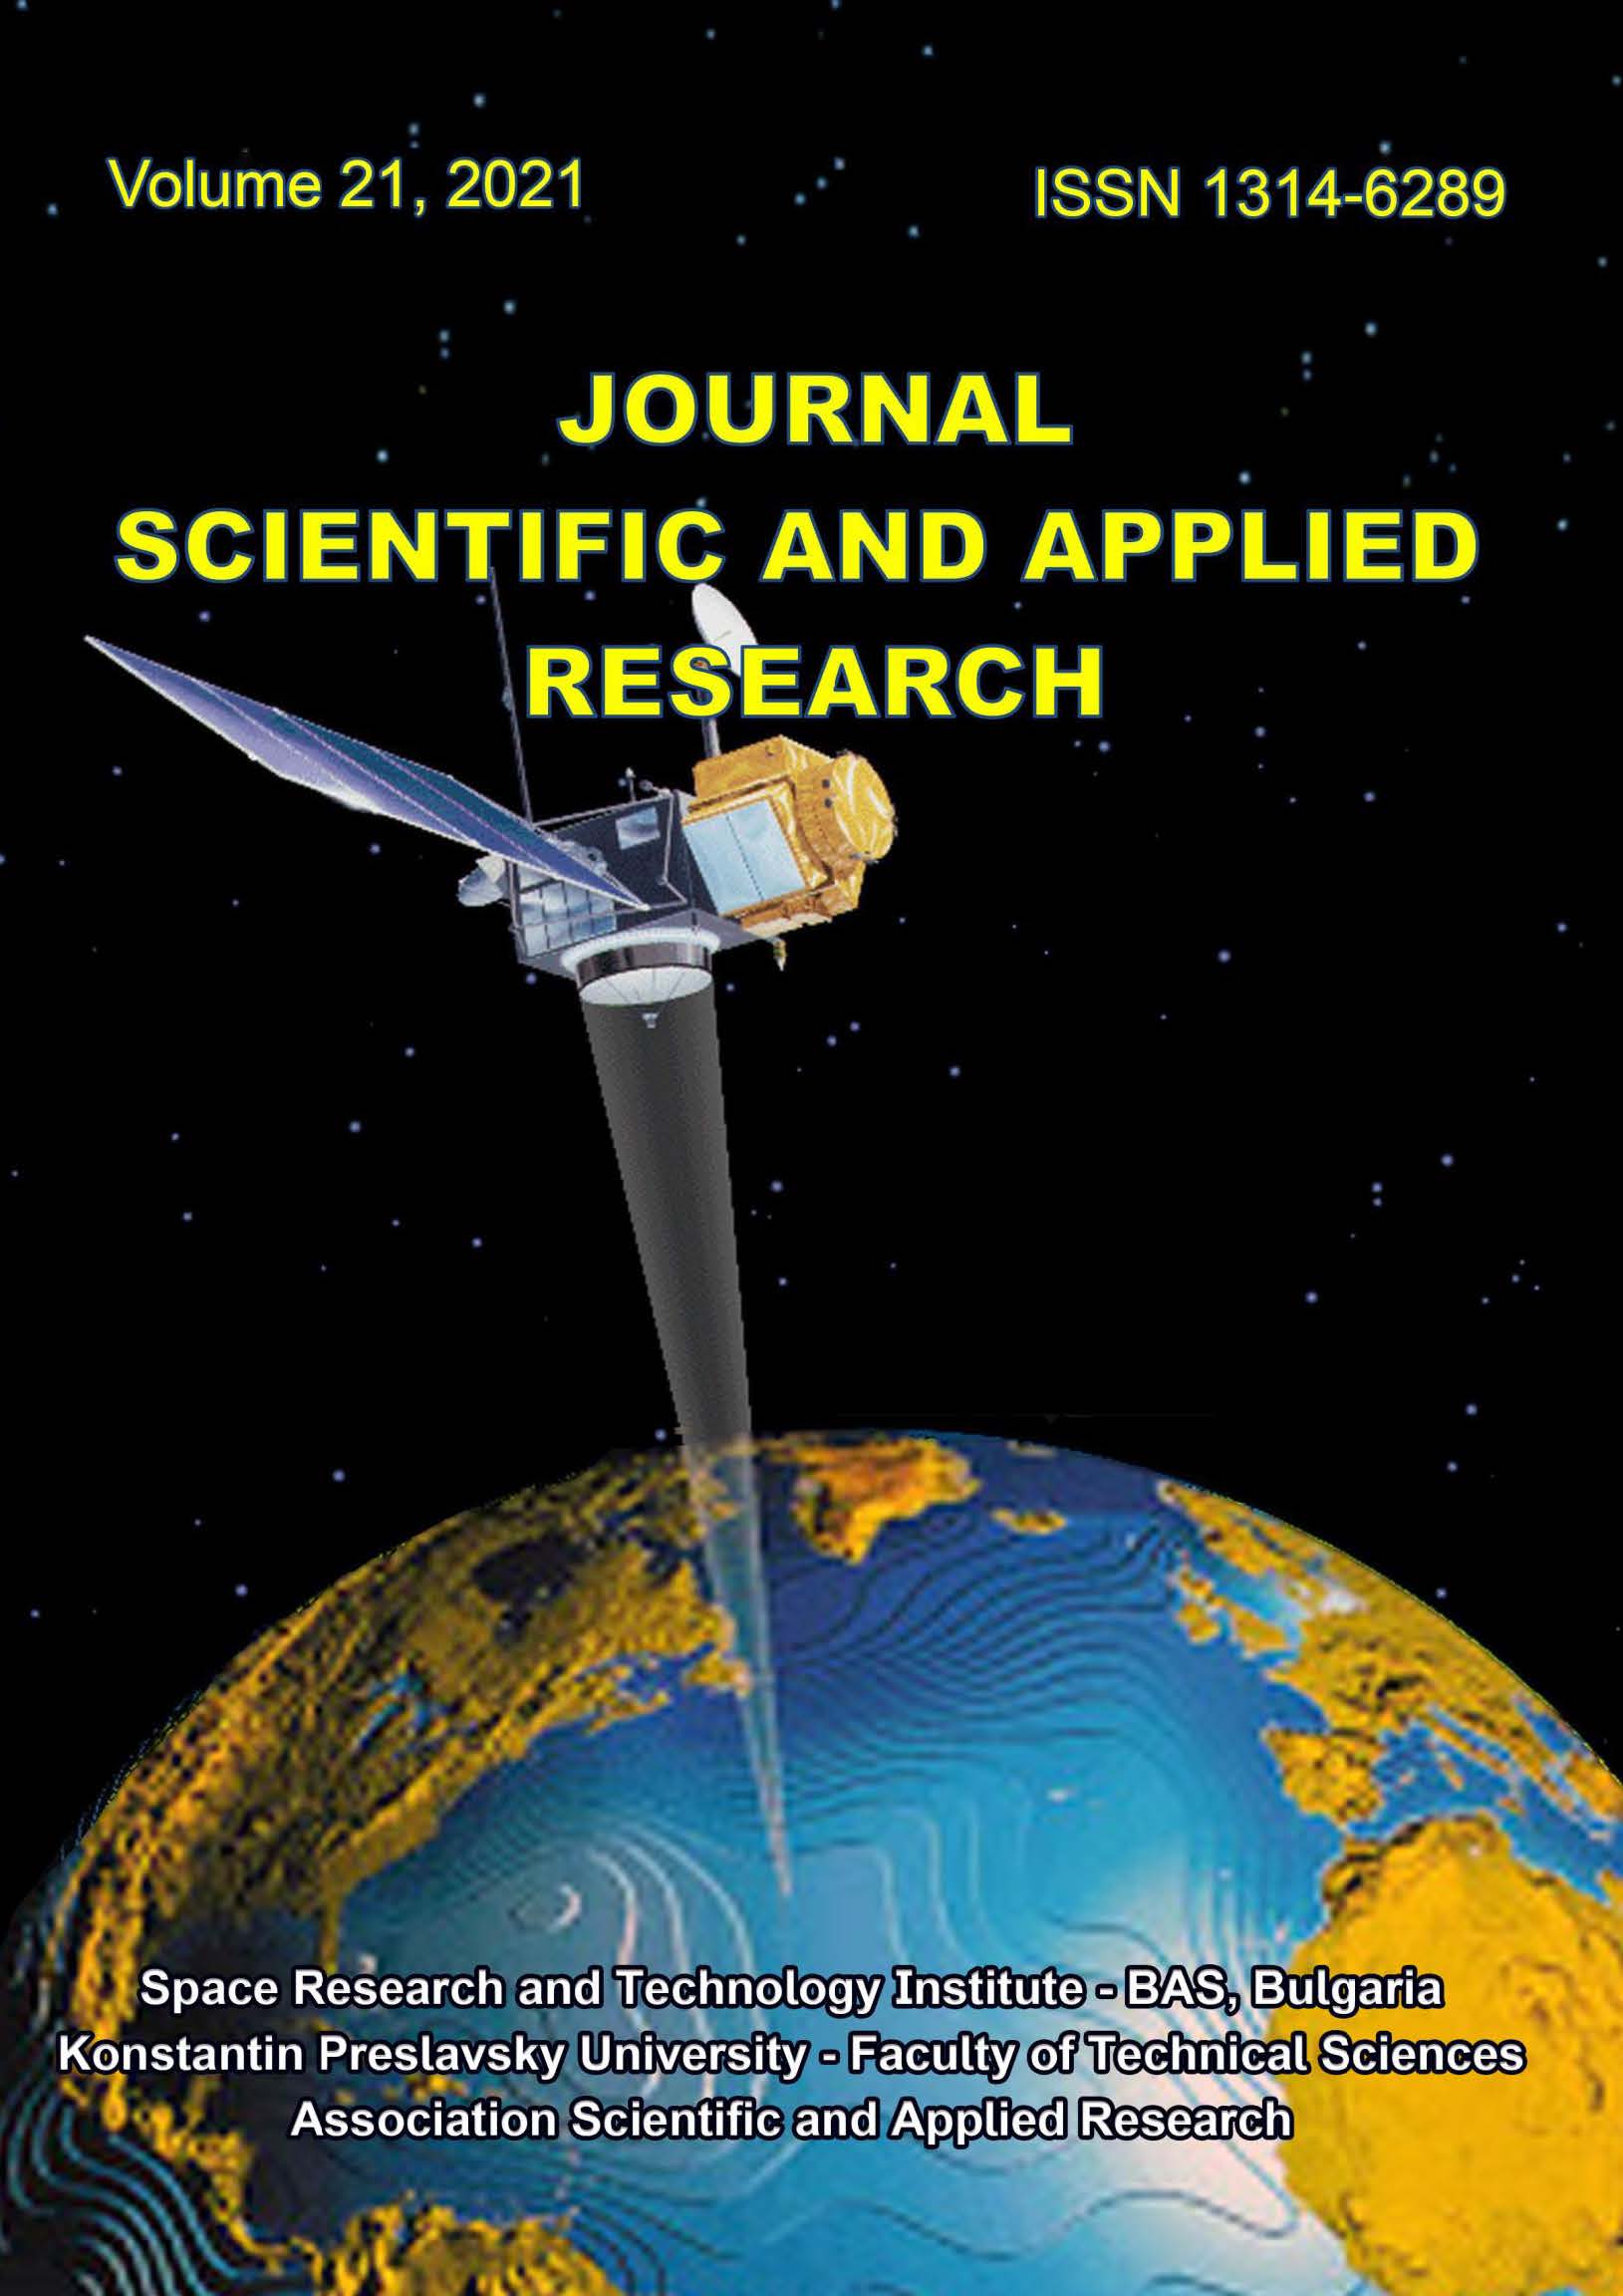 					View Vol. 21 No. 1 (2021): Journal Scientific and Applied Research
				